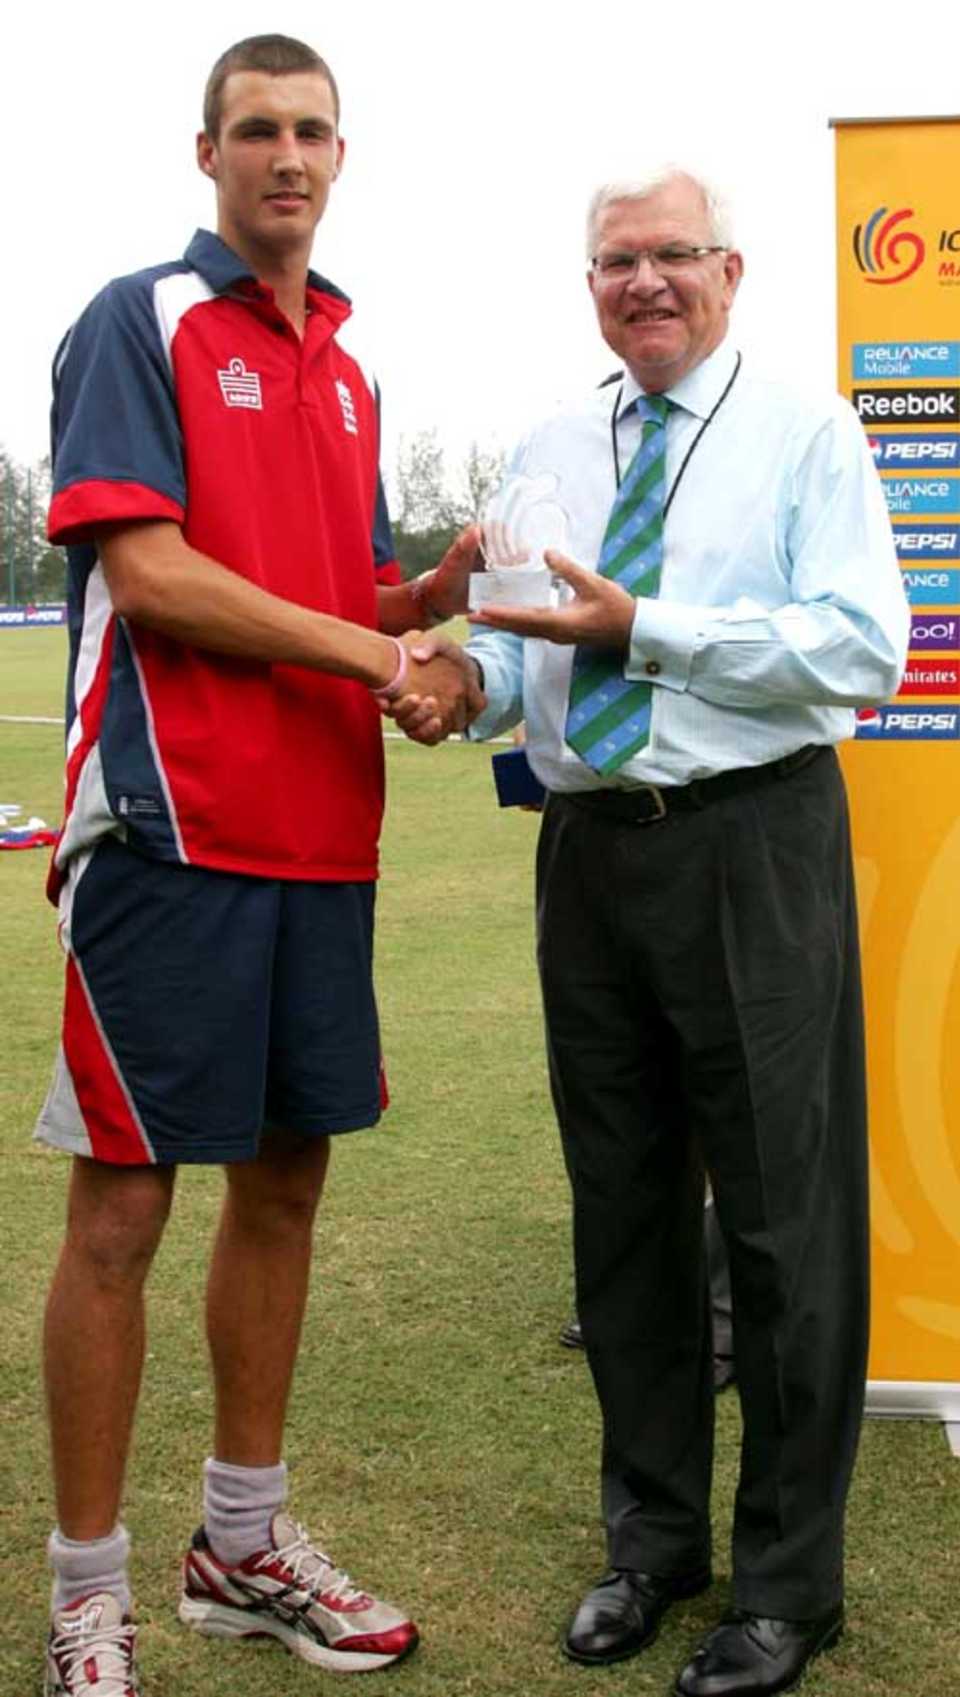 England's Steven Finn receives the Man-of-the-Match award from Malcolm Speed